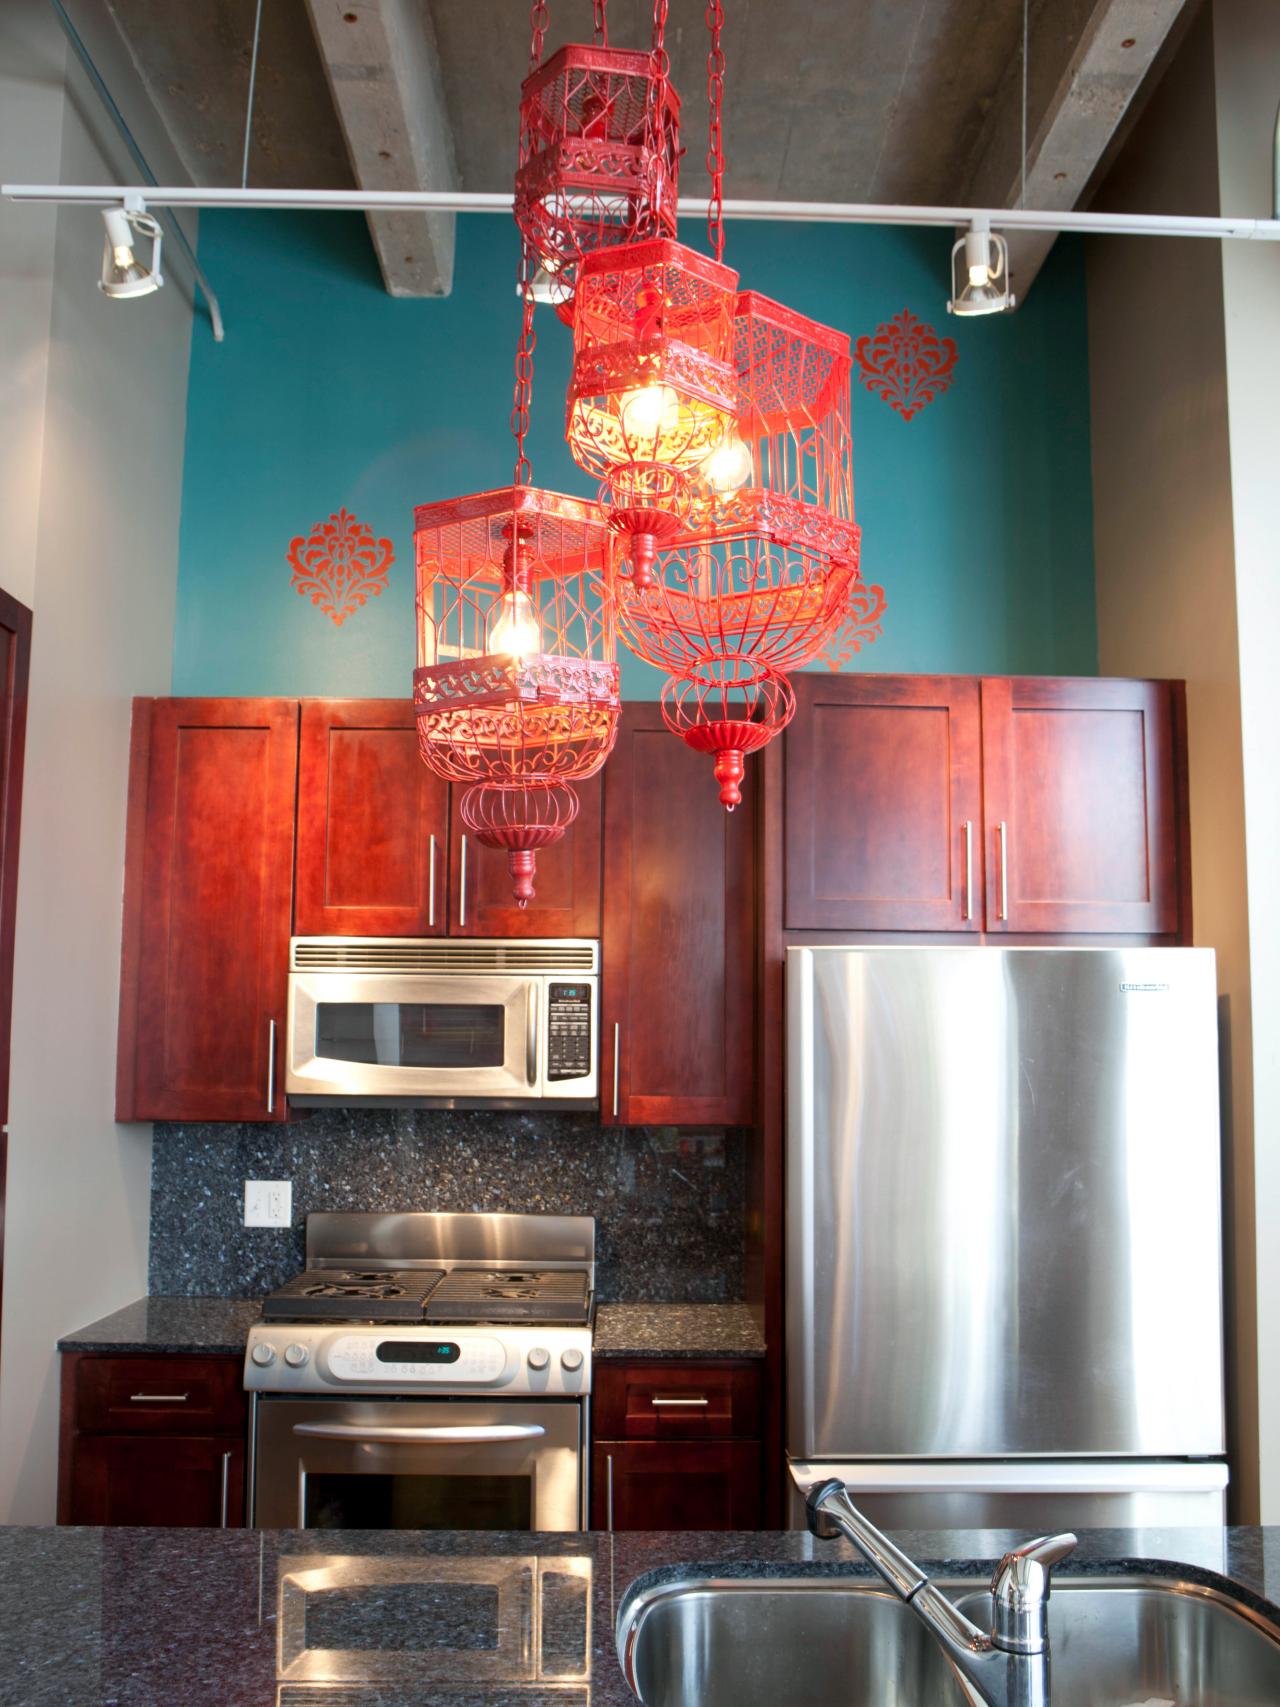 A kitchen with stainless steel sink and red bird cages hanging from the ceiling, with kitchen cabinets.